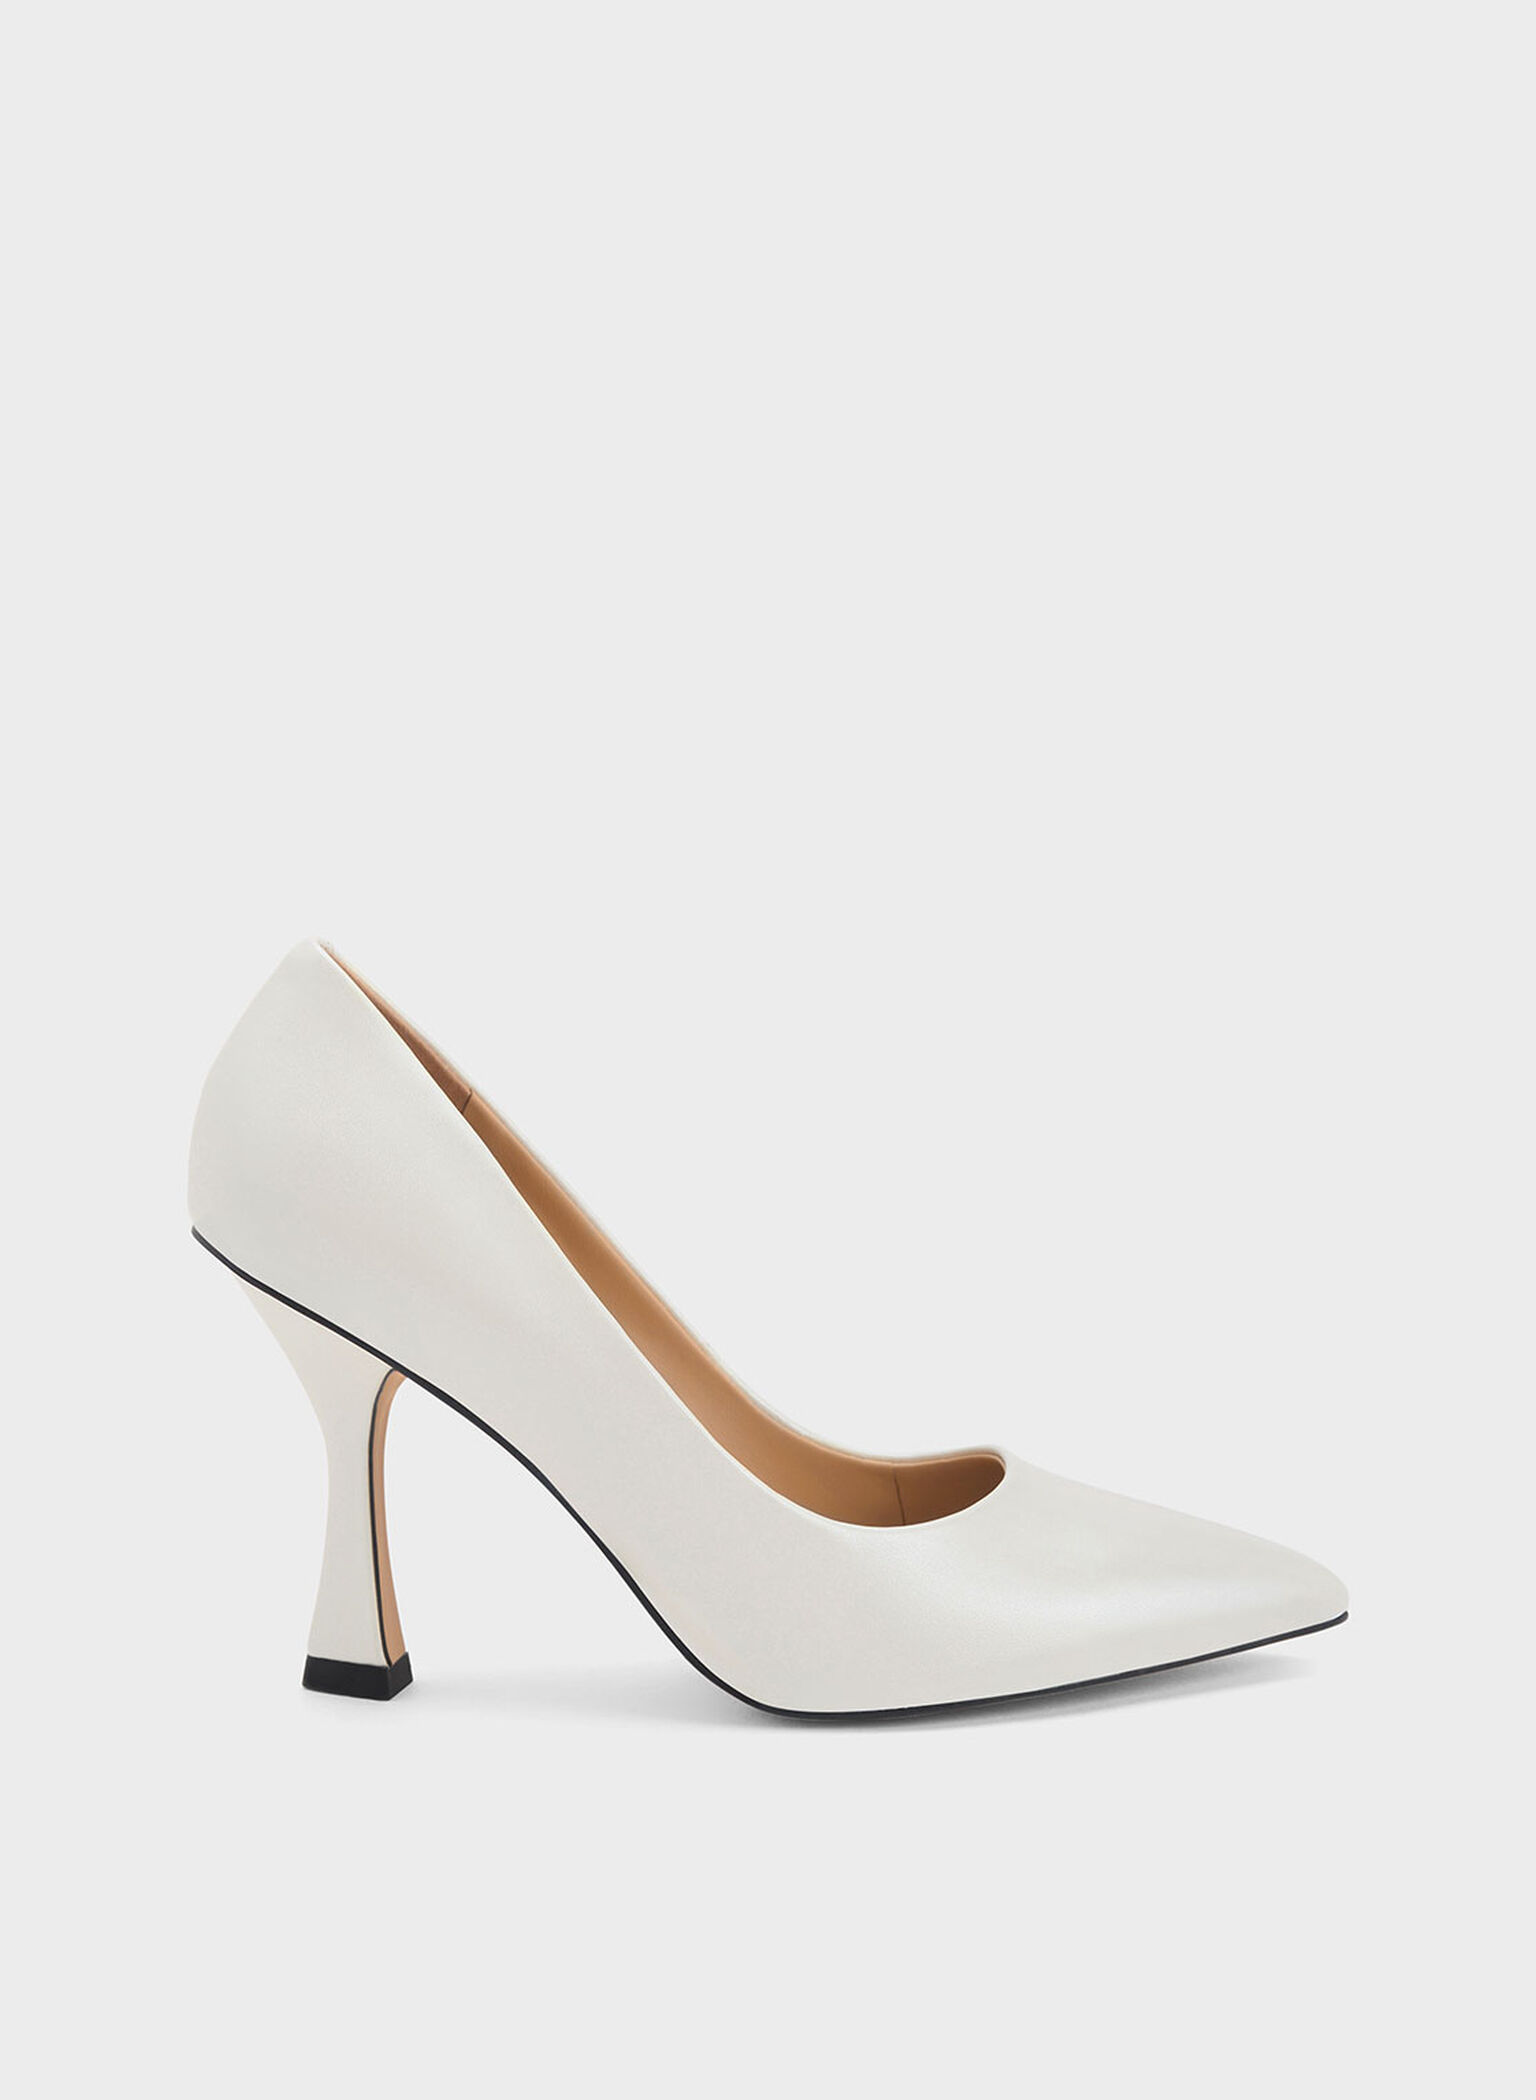 White Leather Flare Heel Pumps - CHARLES & KEITH US